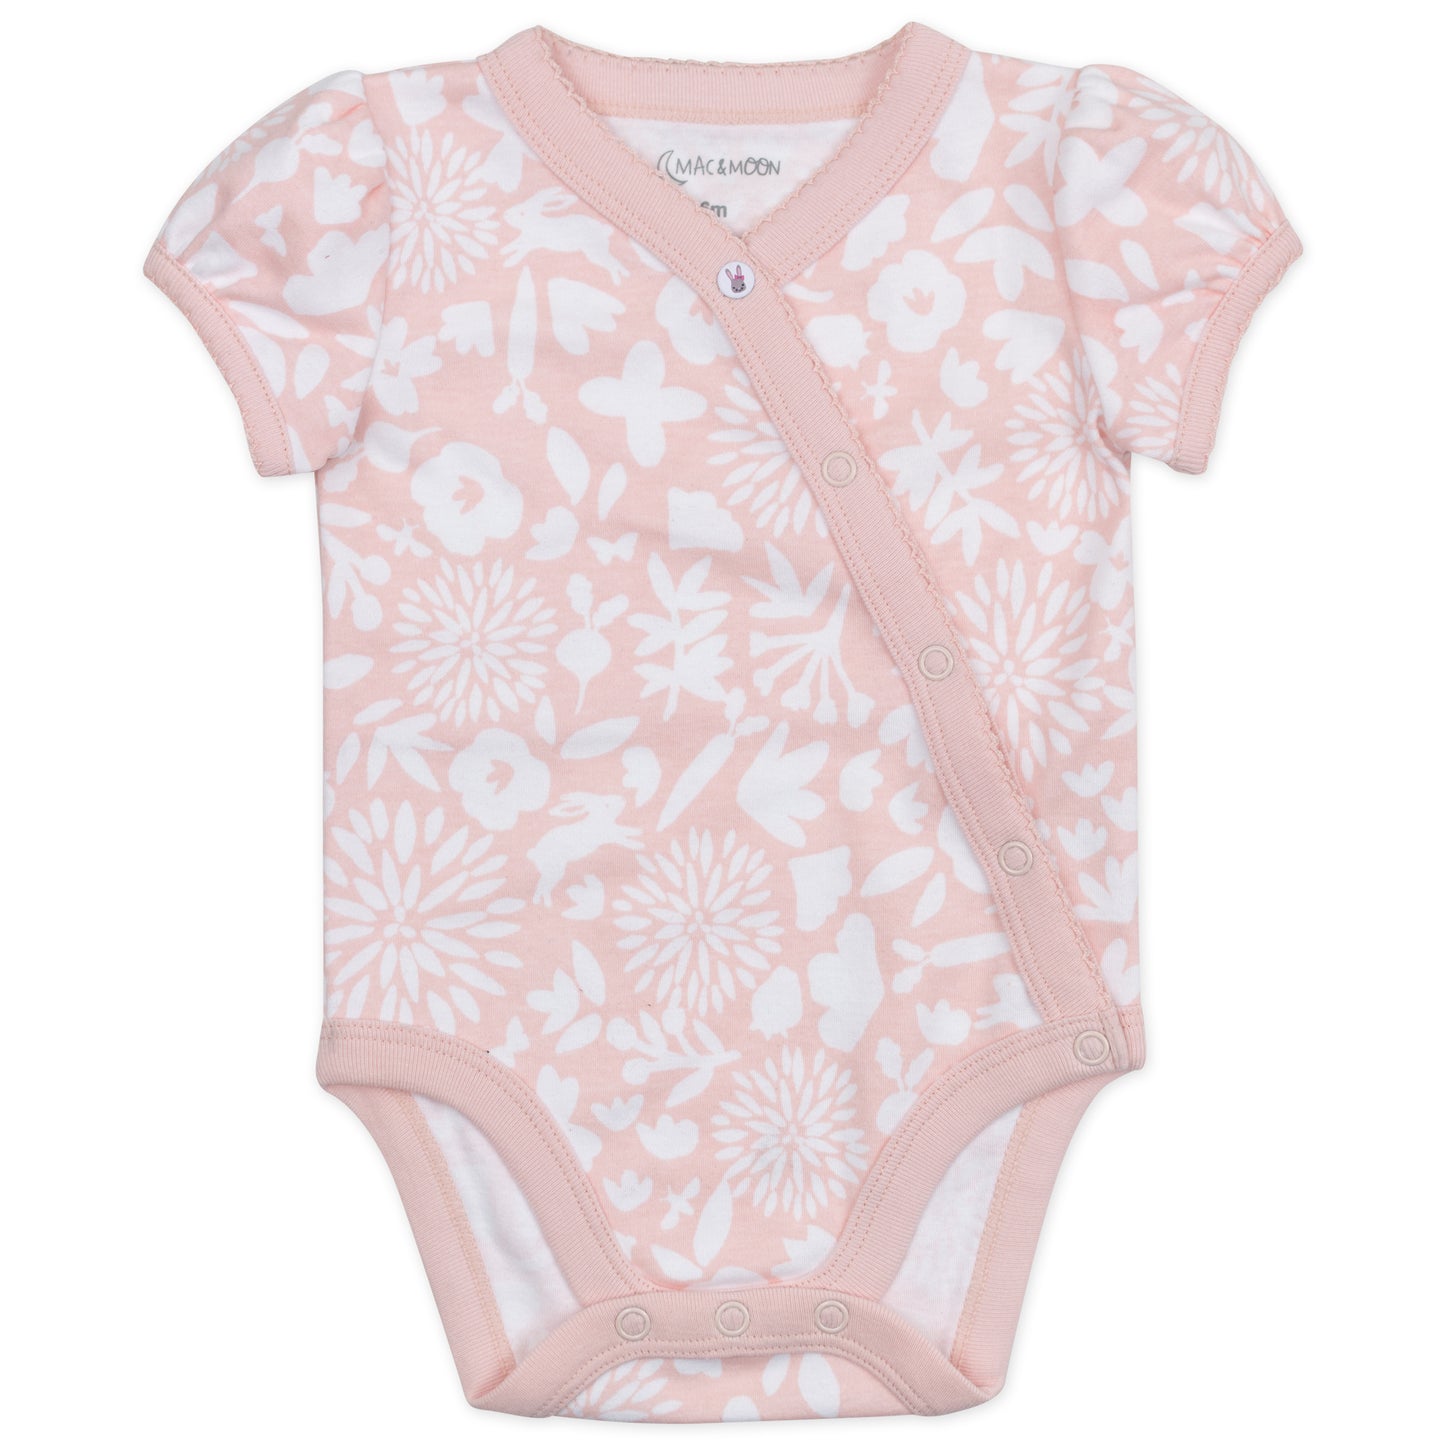 3-Pack Organic Cotton Short Sleeve Bodysuit in Bunny Floral Print